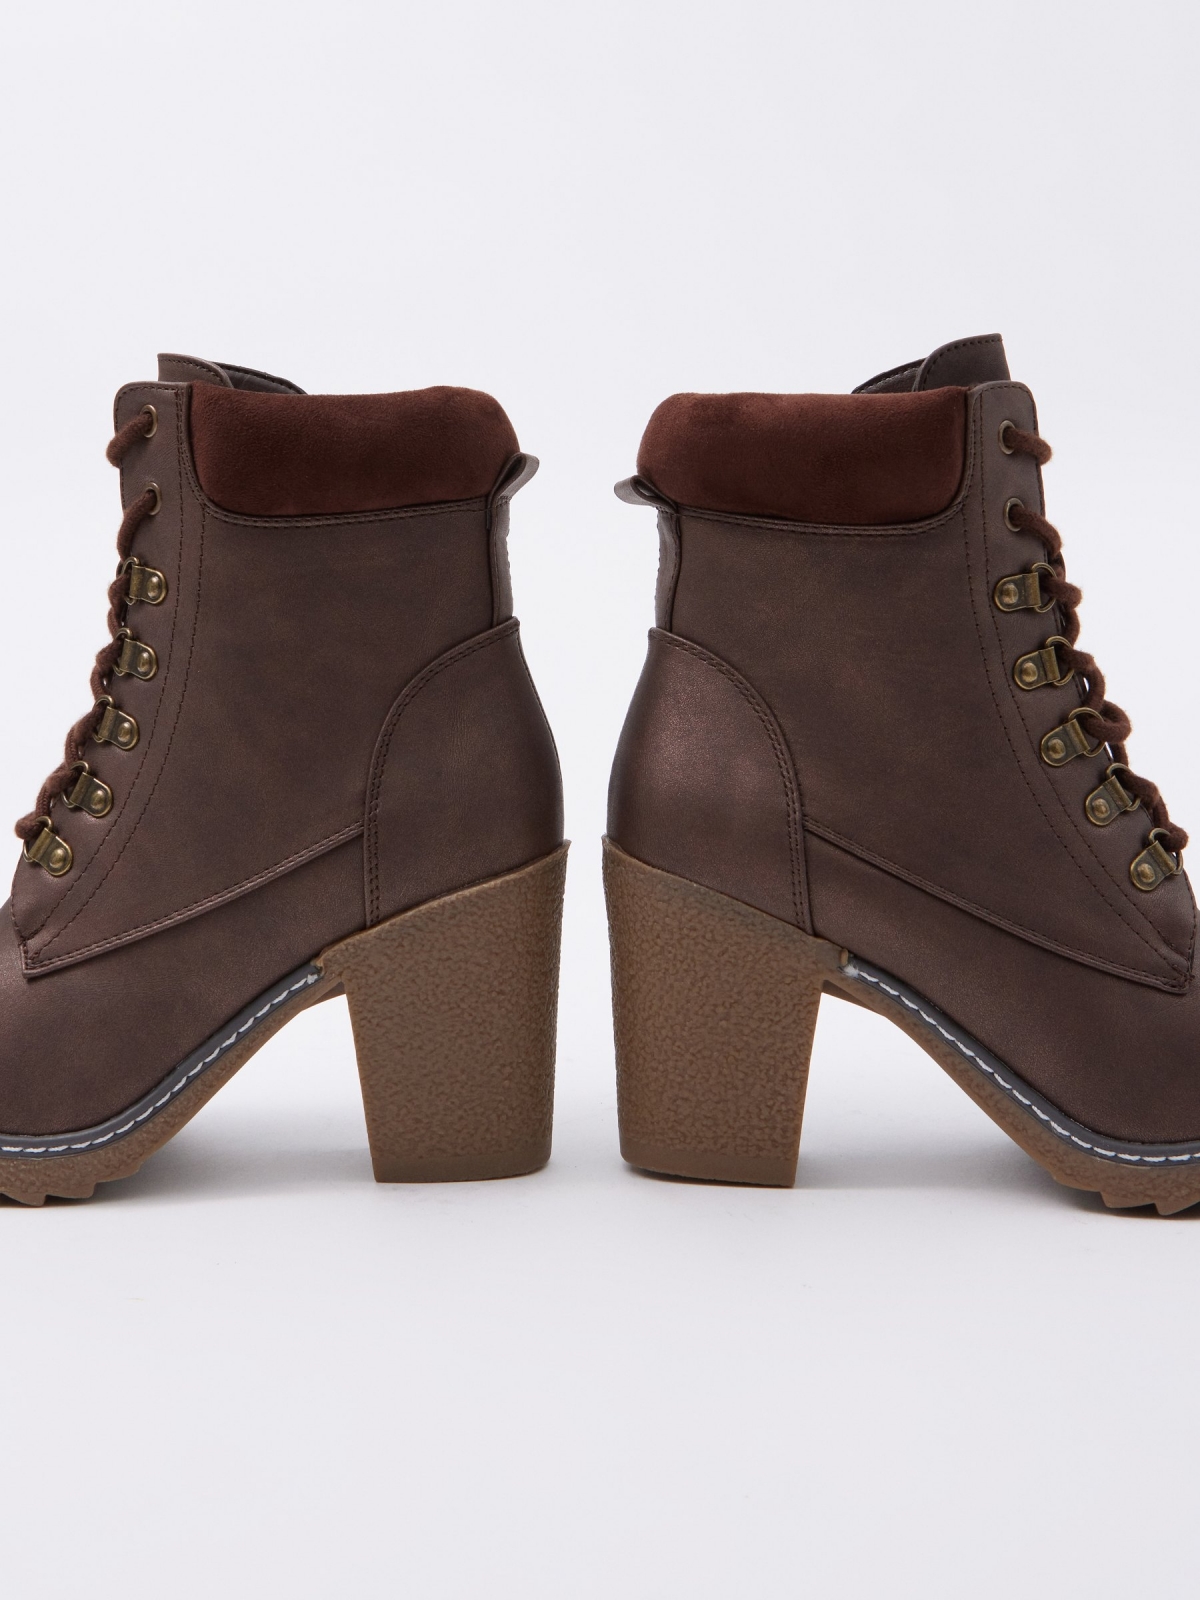 Brown lace-up leather effect ankle boots dark brown detail view